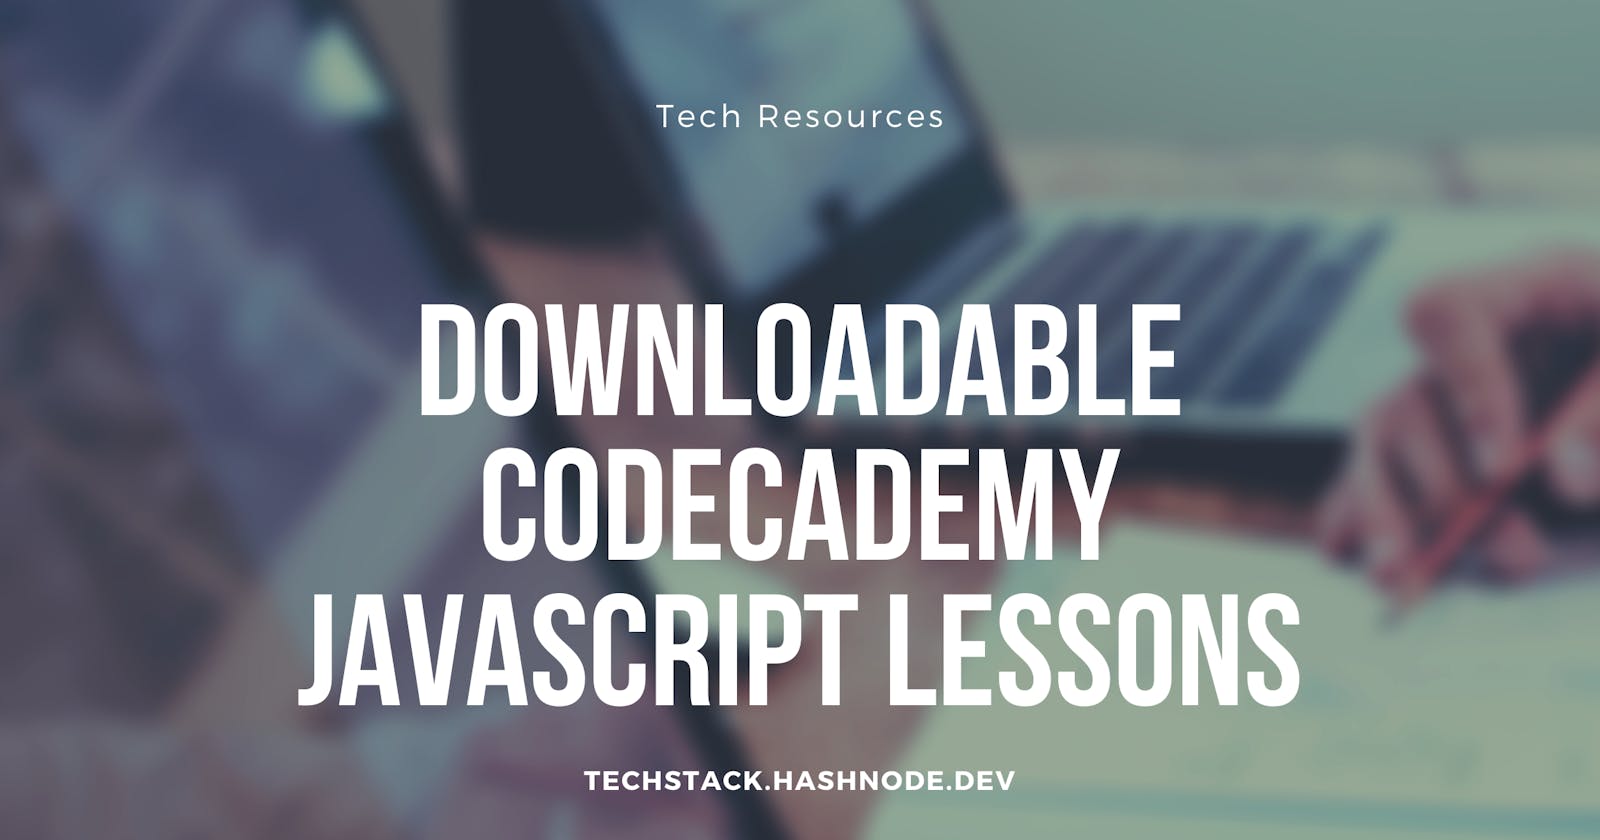 Downloadable Codecademy JavaScript Lessons